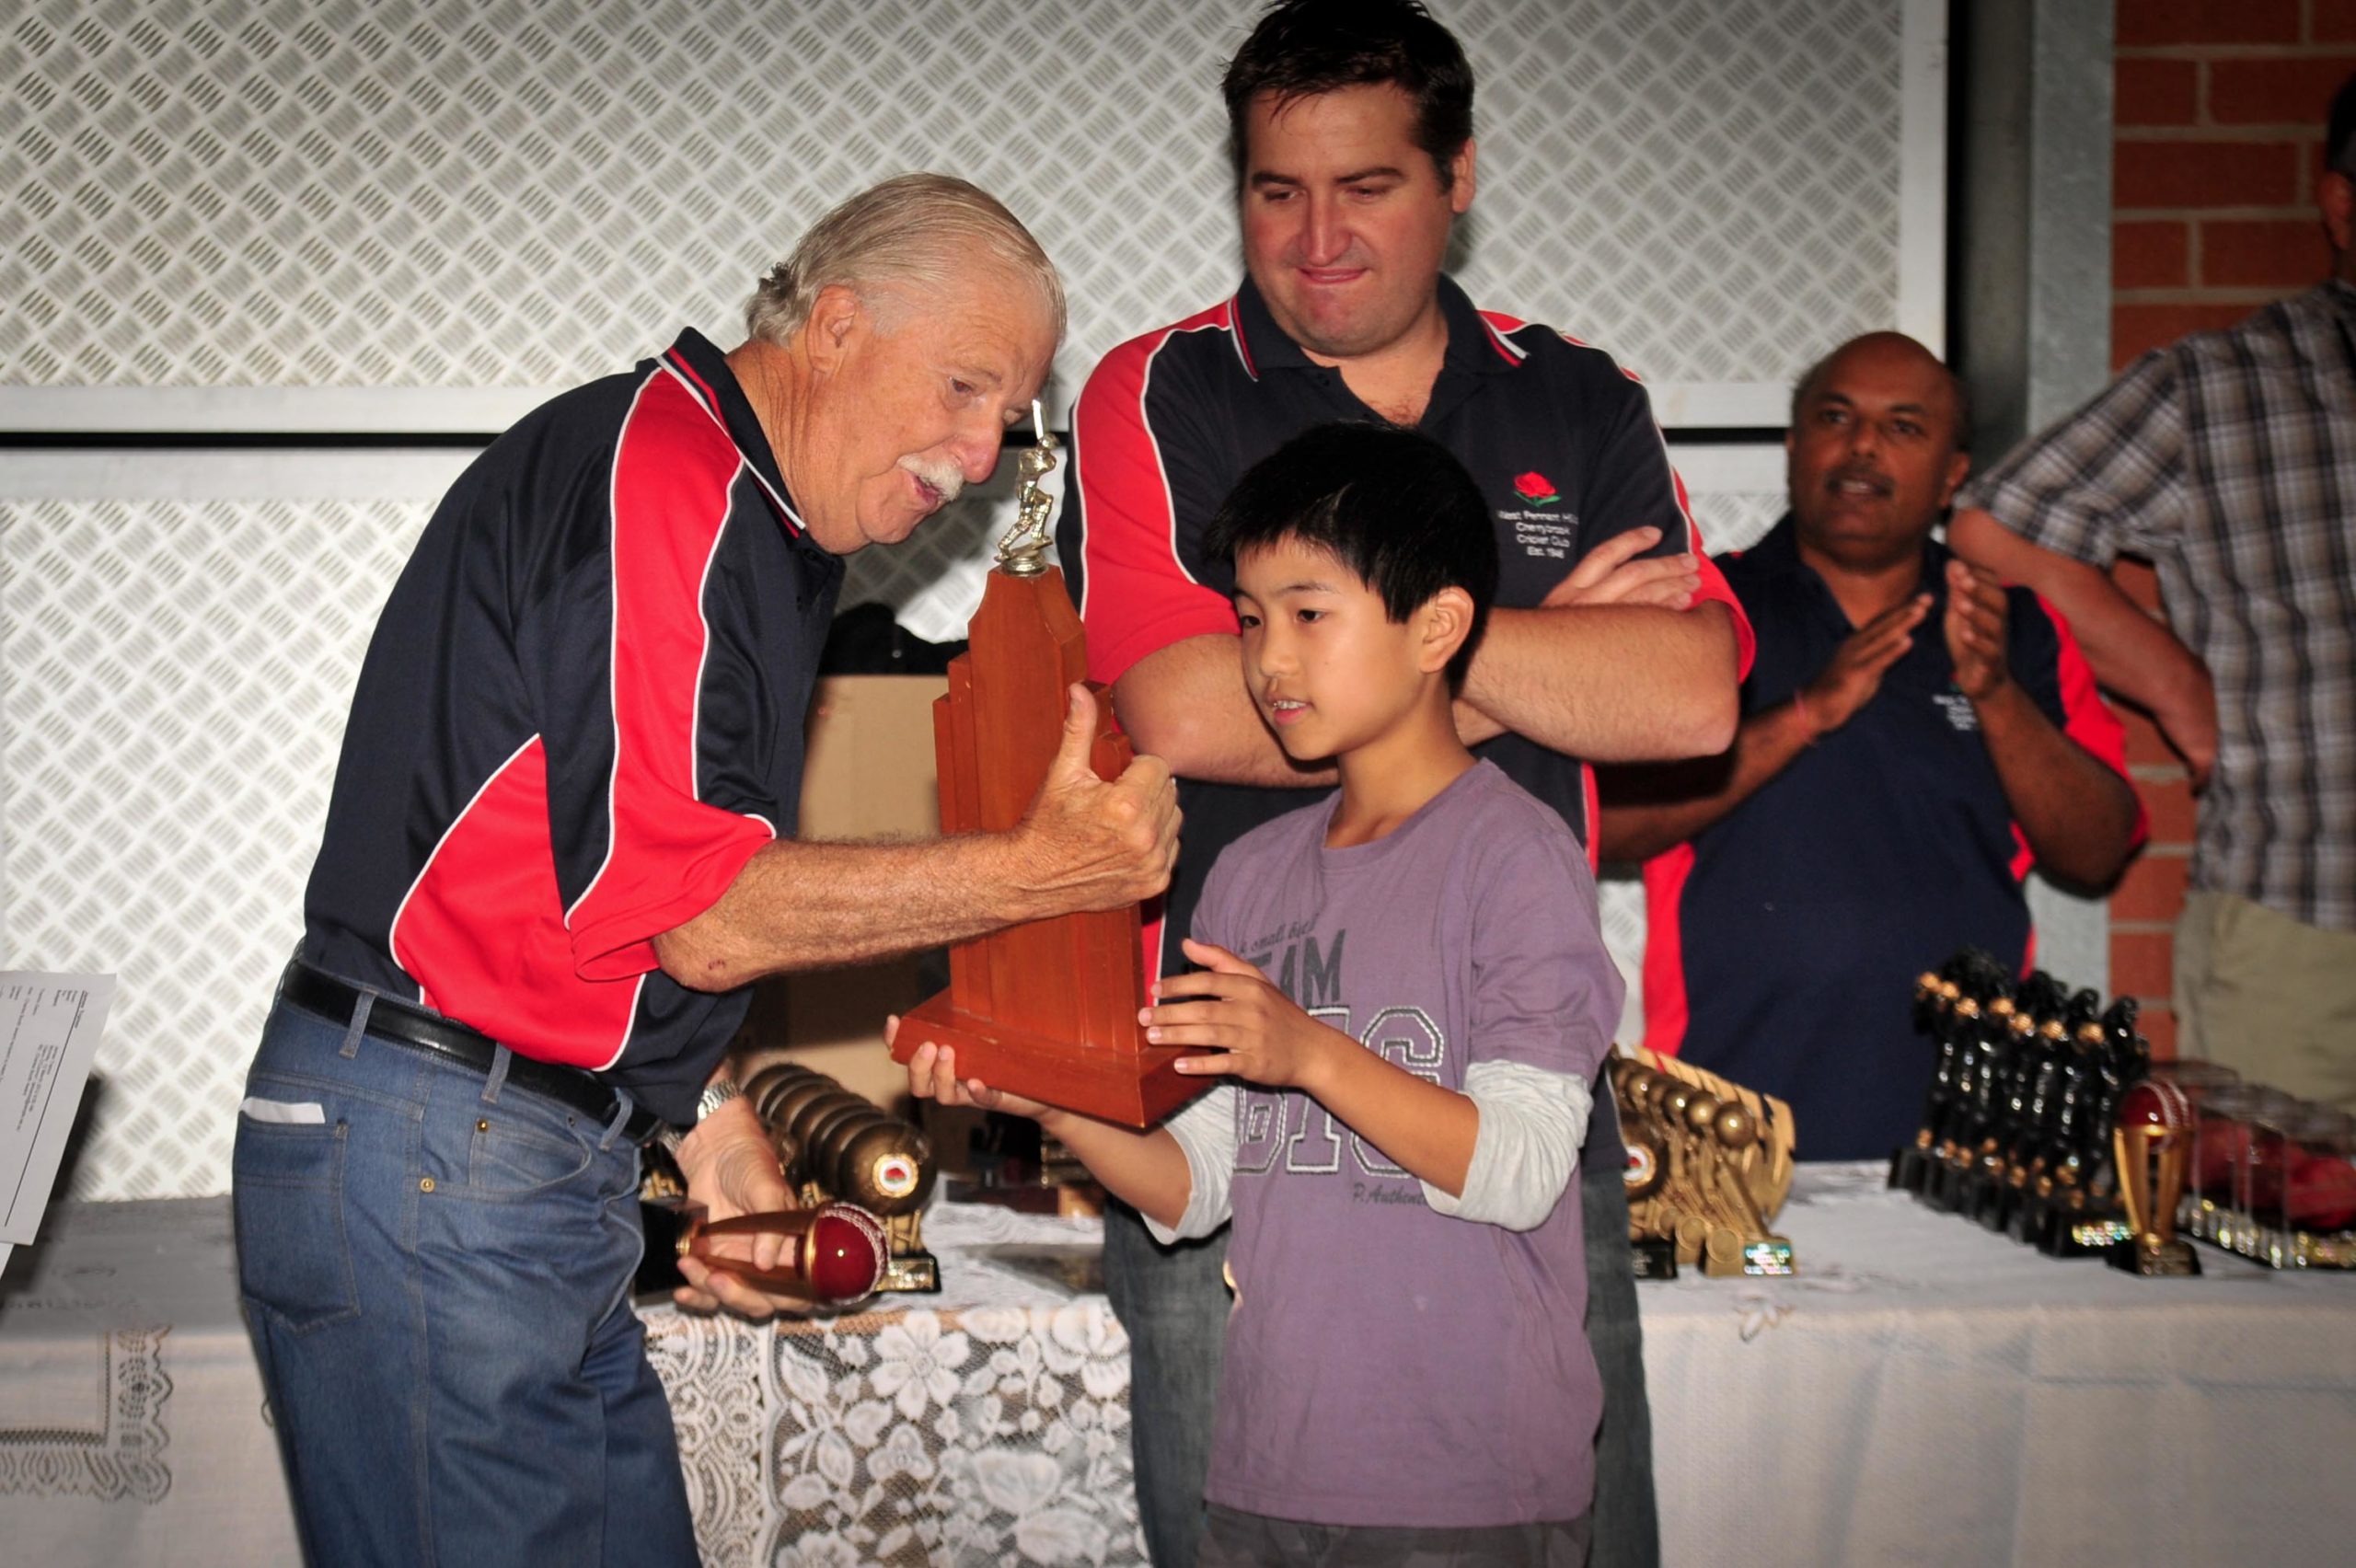 Adam Tan receiving the Charles Booth Memorial Trophy (2011/12) from Barry McDonald (left) and Glenn O'Connor with Deepak Narsai in the background.